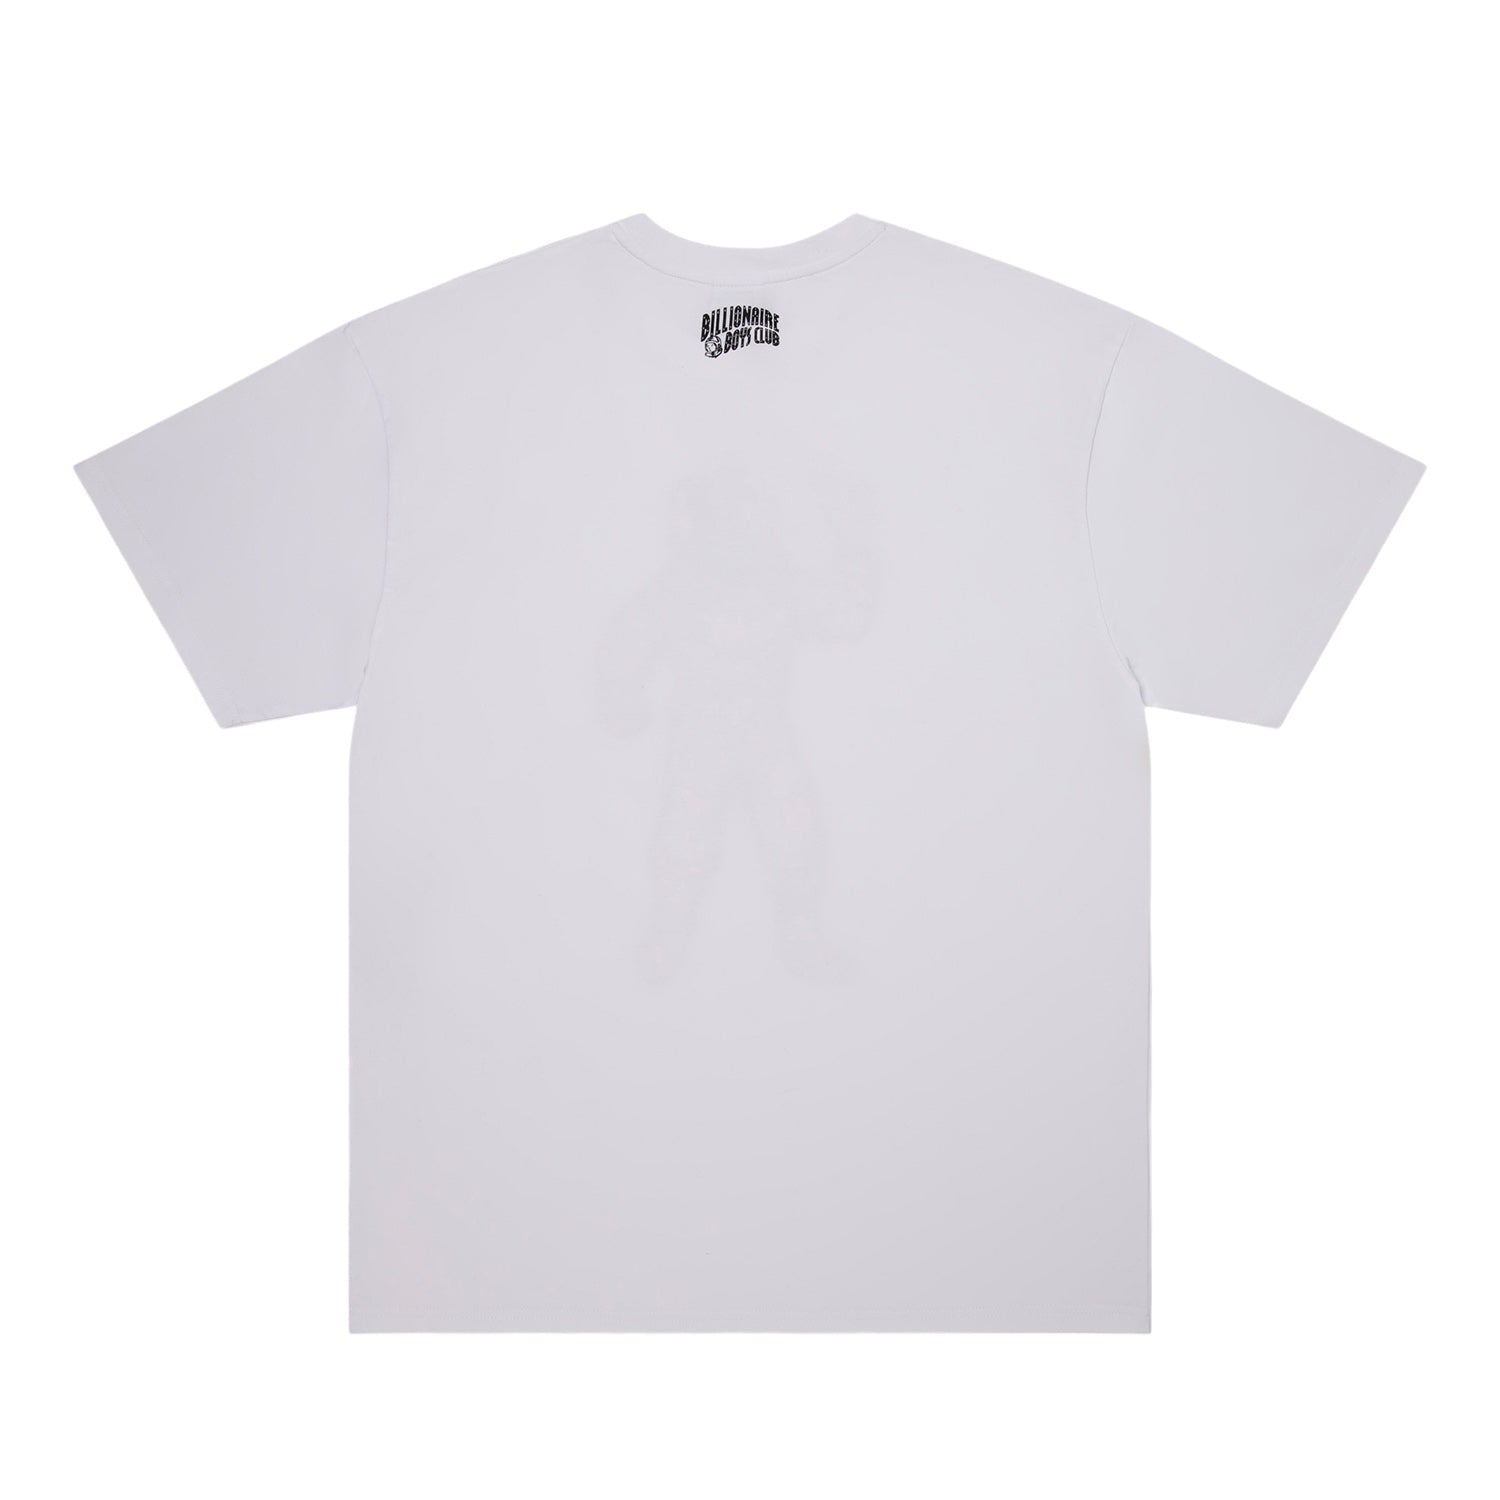 Holiday Gift Guide - Under $100 All BB Astro SS Tee Bleach White 841-3204-BWHT - T-SHIRTS - Canada